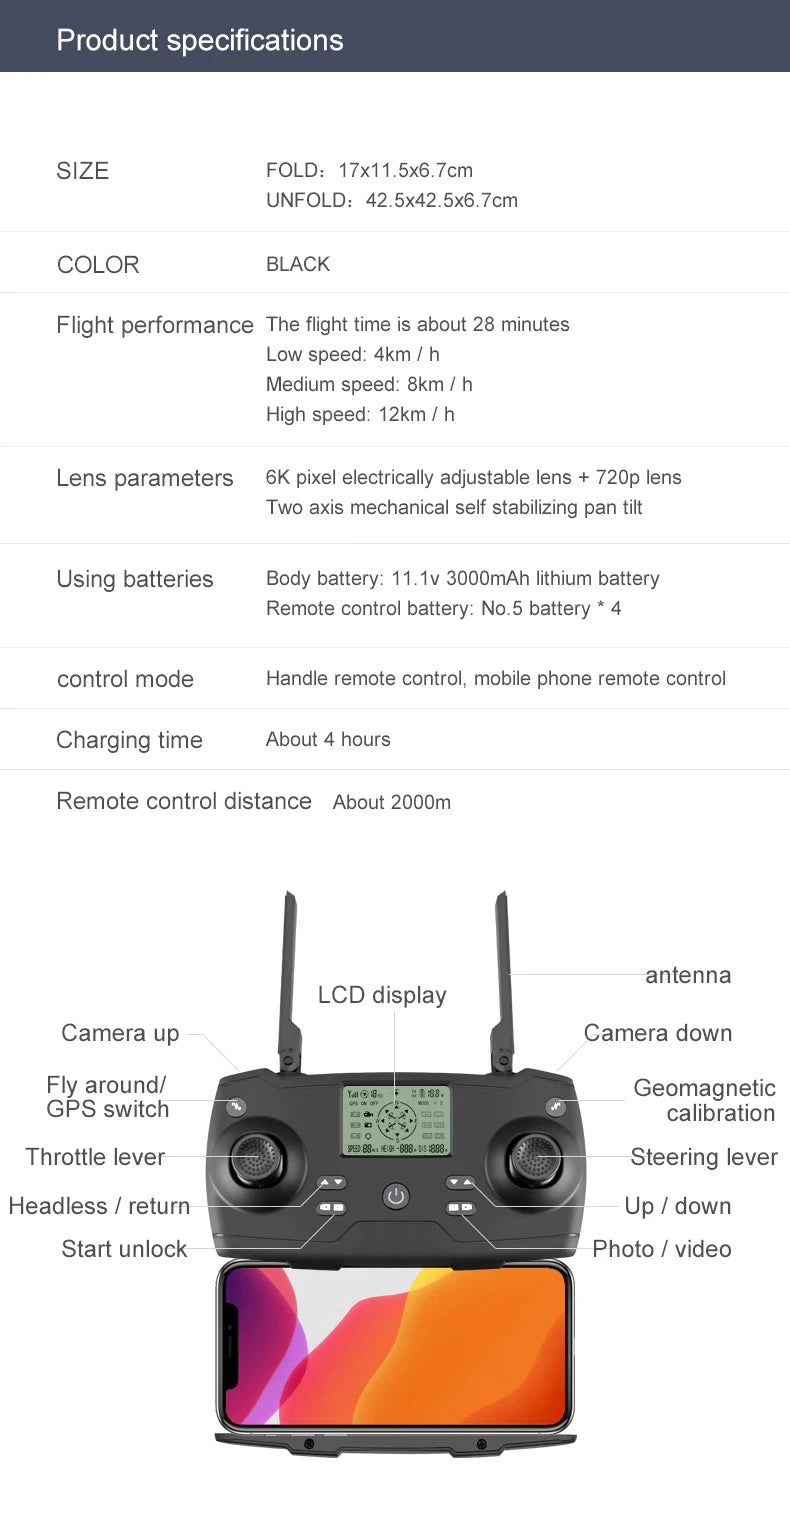 8811 Pro Drone, COLOR BLACK Flight performance The flight time is about 28 minutes Low